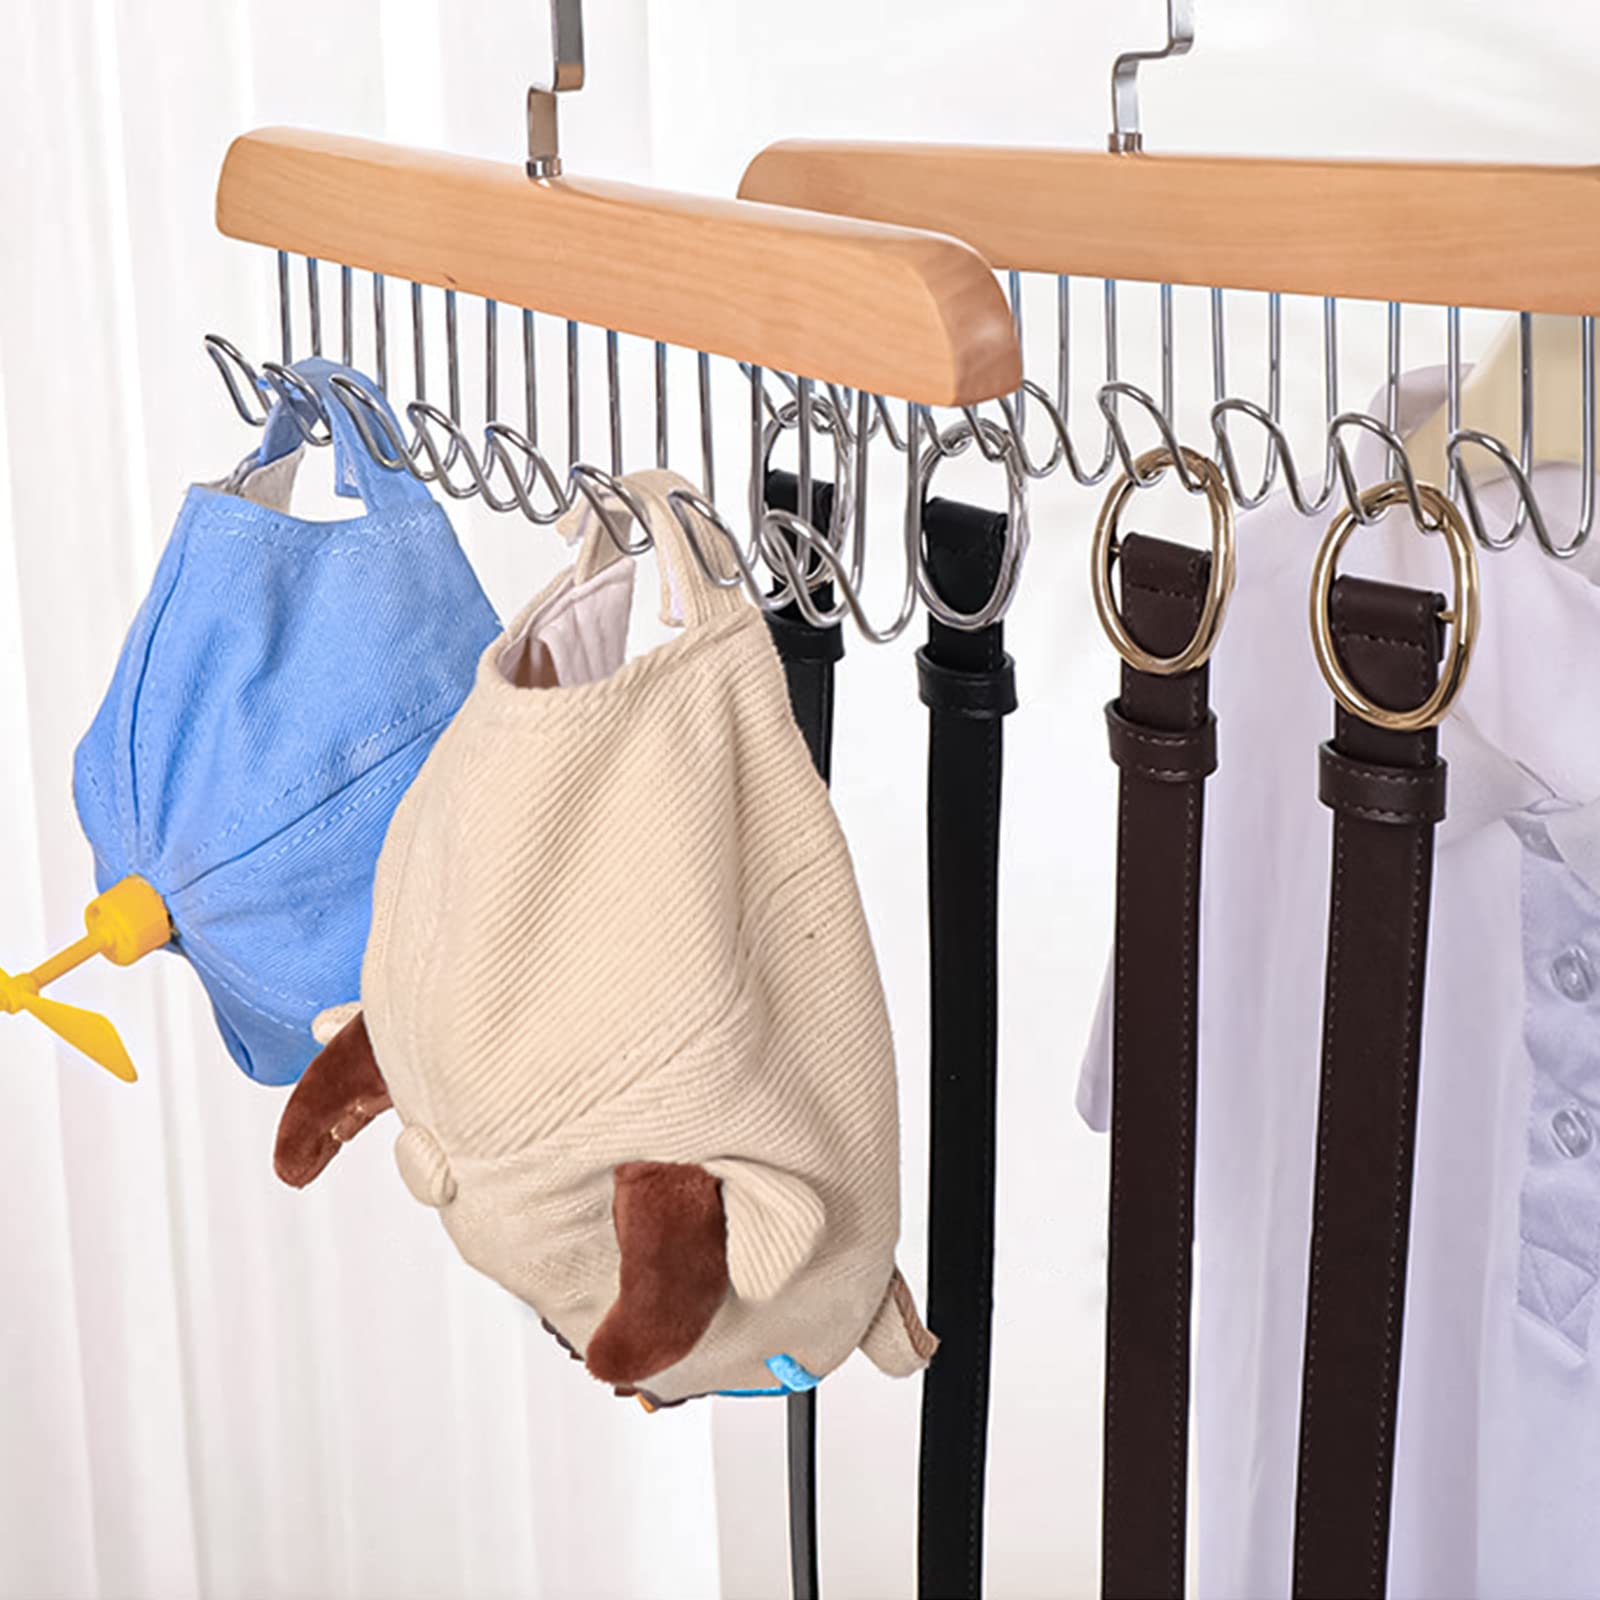 Just Hangin' – The History of the Humble Coat Hanger